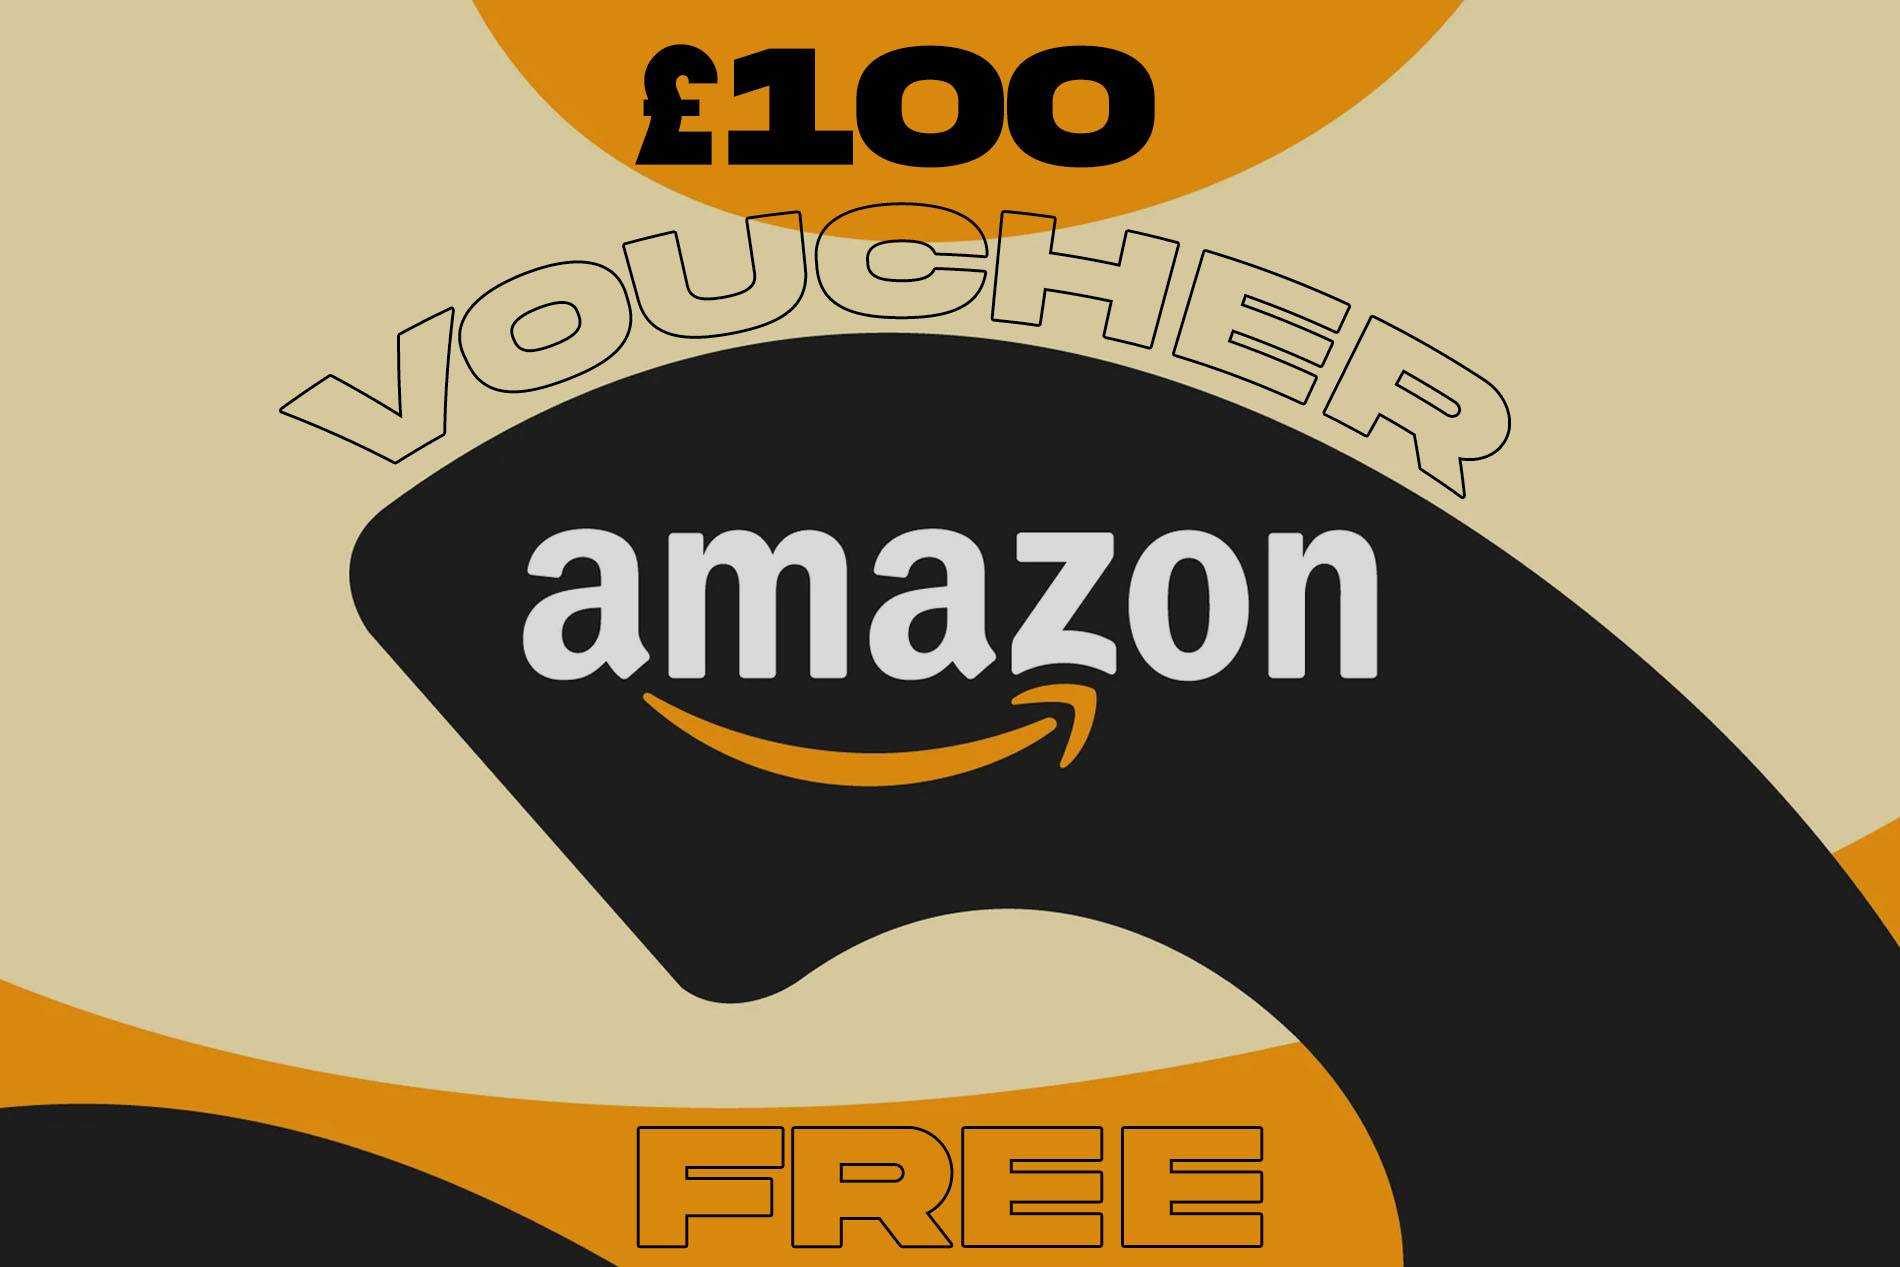 FREE: Chance to Win £100 Amazon Voucher (Prize Tripled Over £1 Spend)